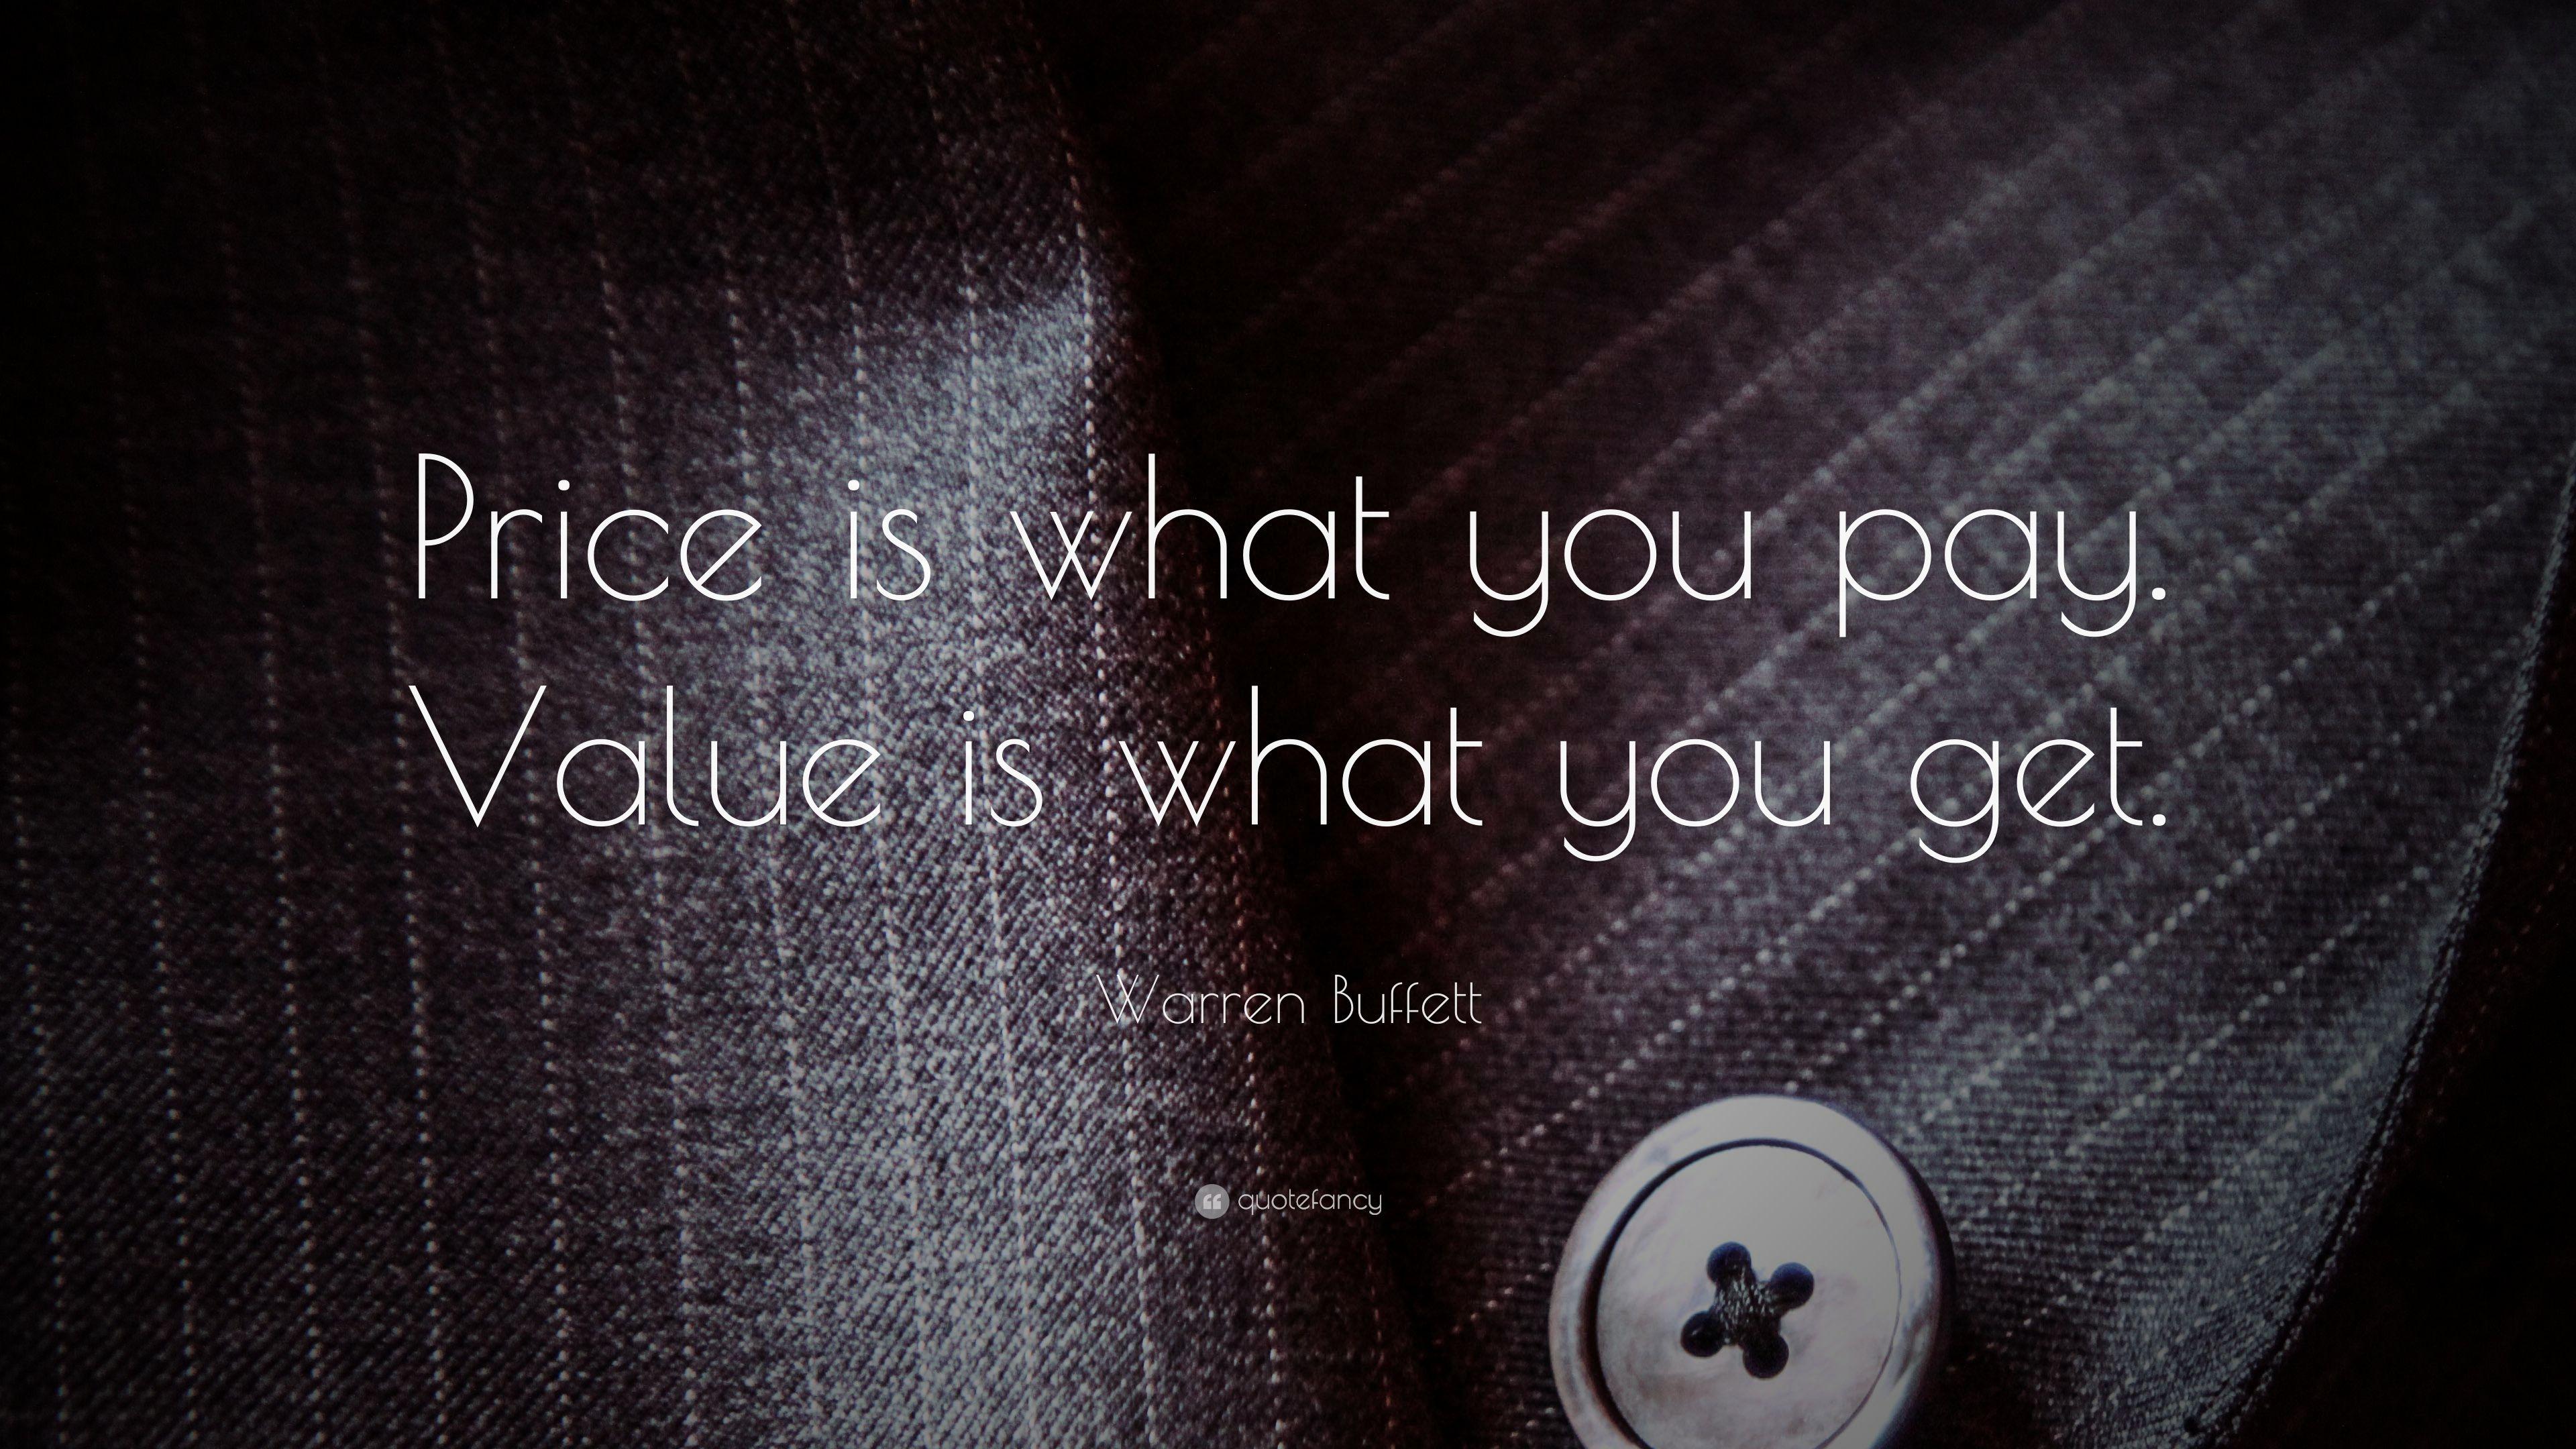 Warren Buffett Quote: “Price is what you pay. Value is what you get